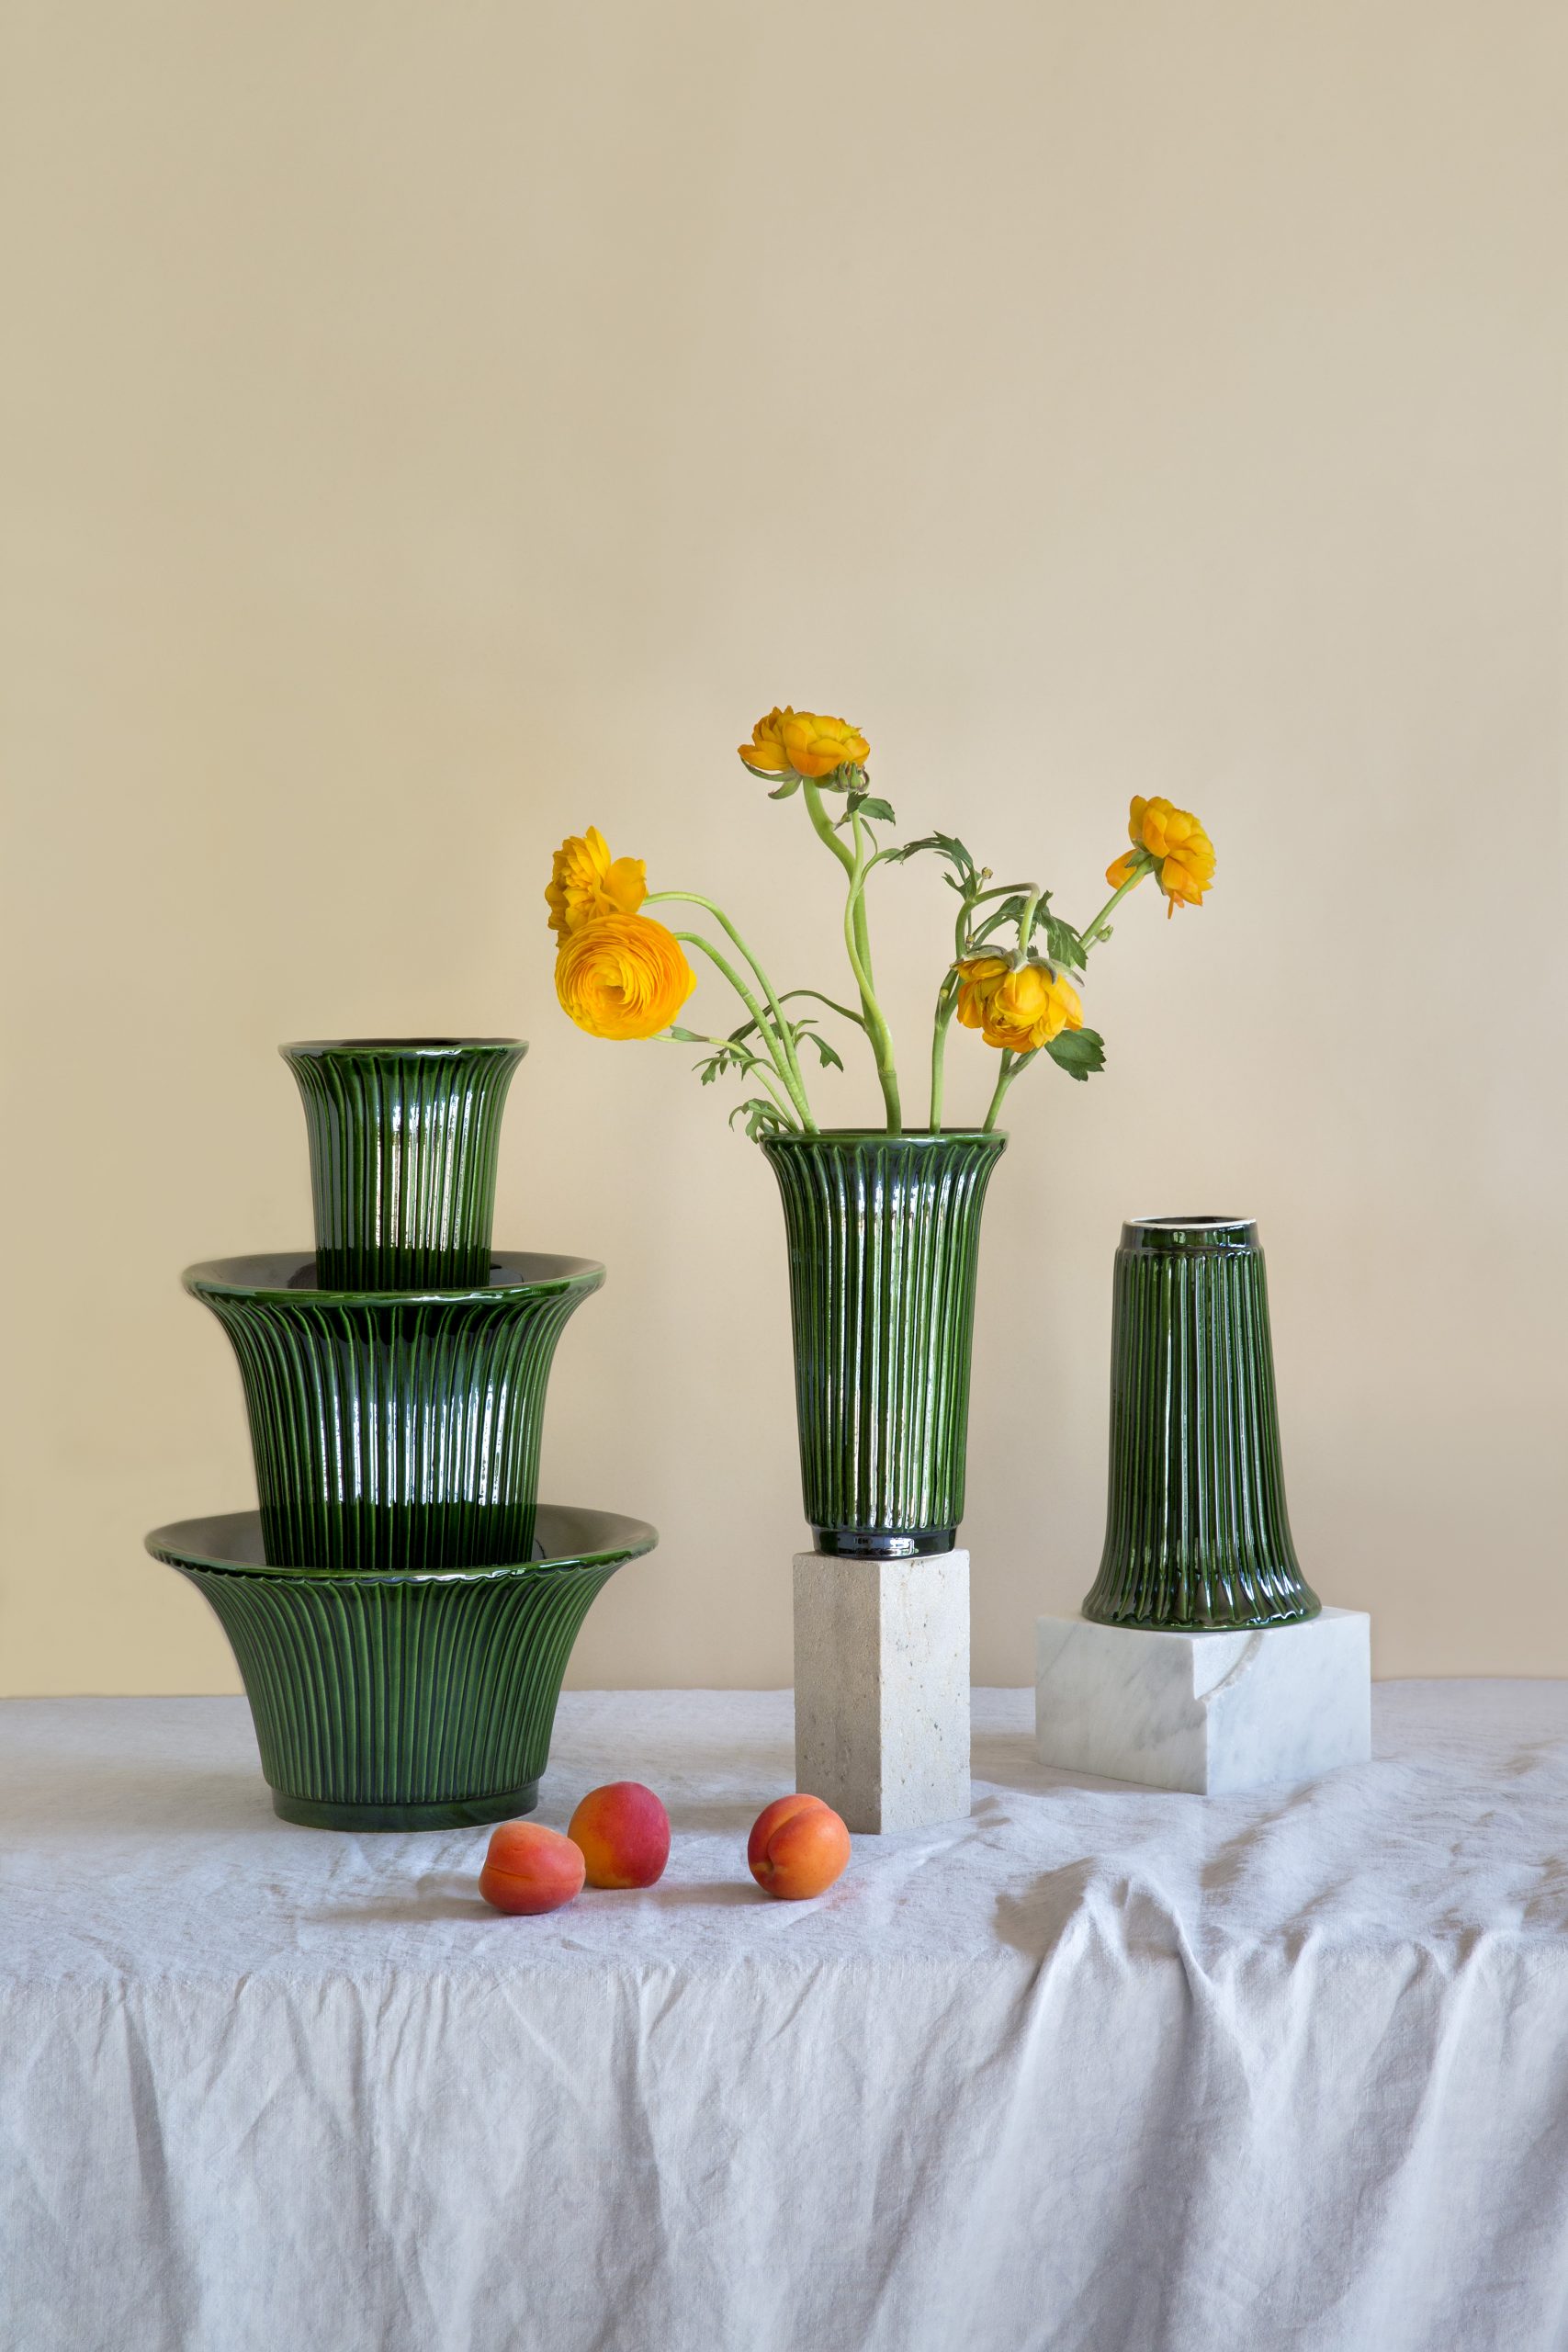 Collection of glazed green vases and standing pots arranged with flowers.